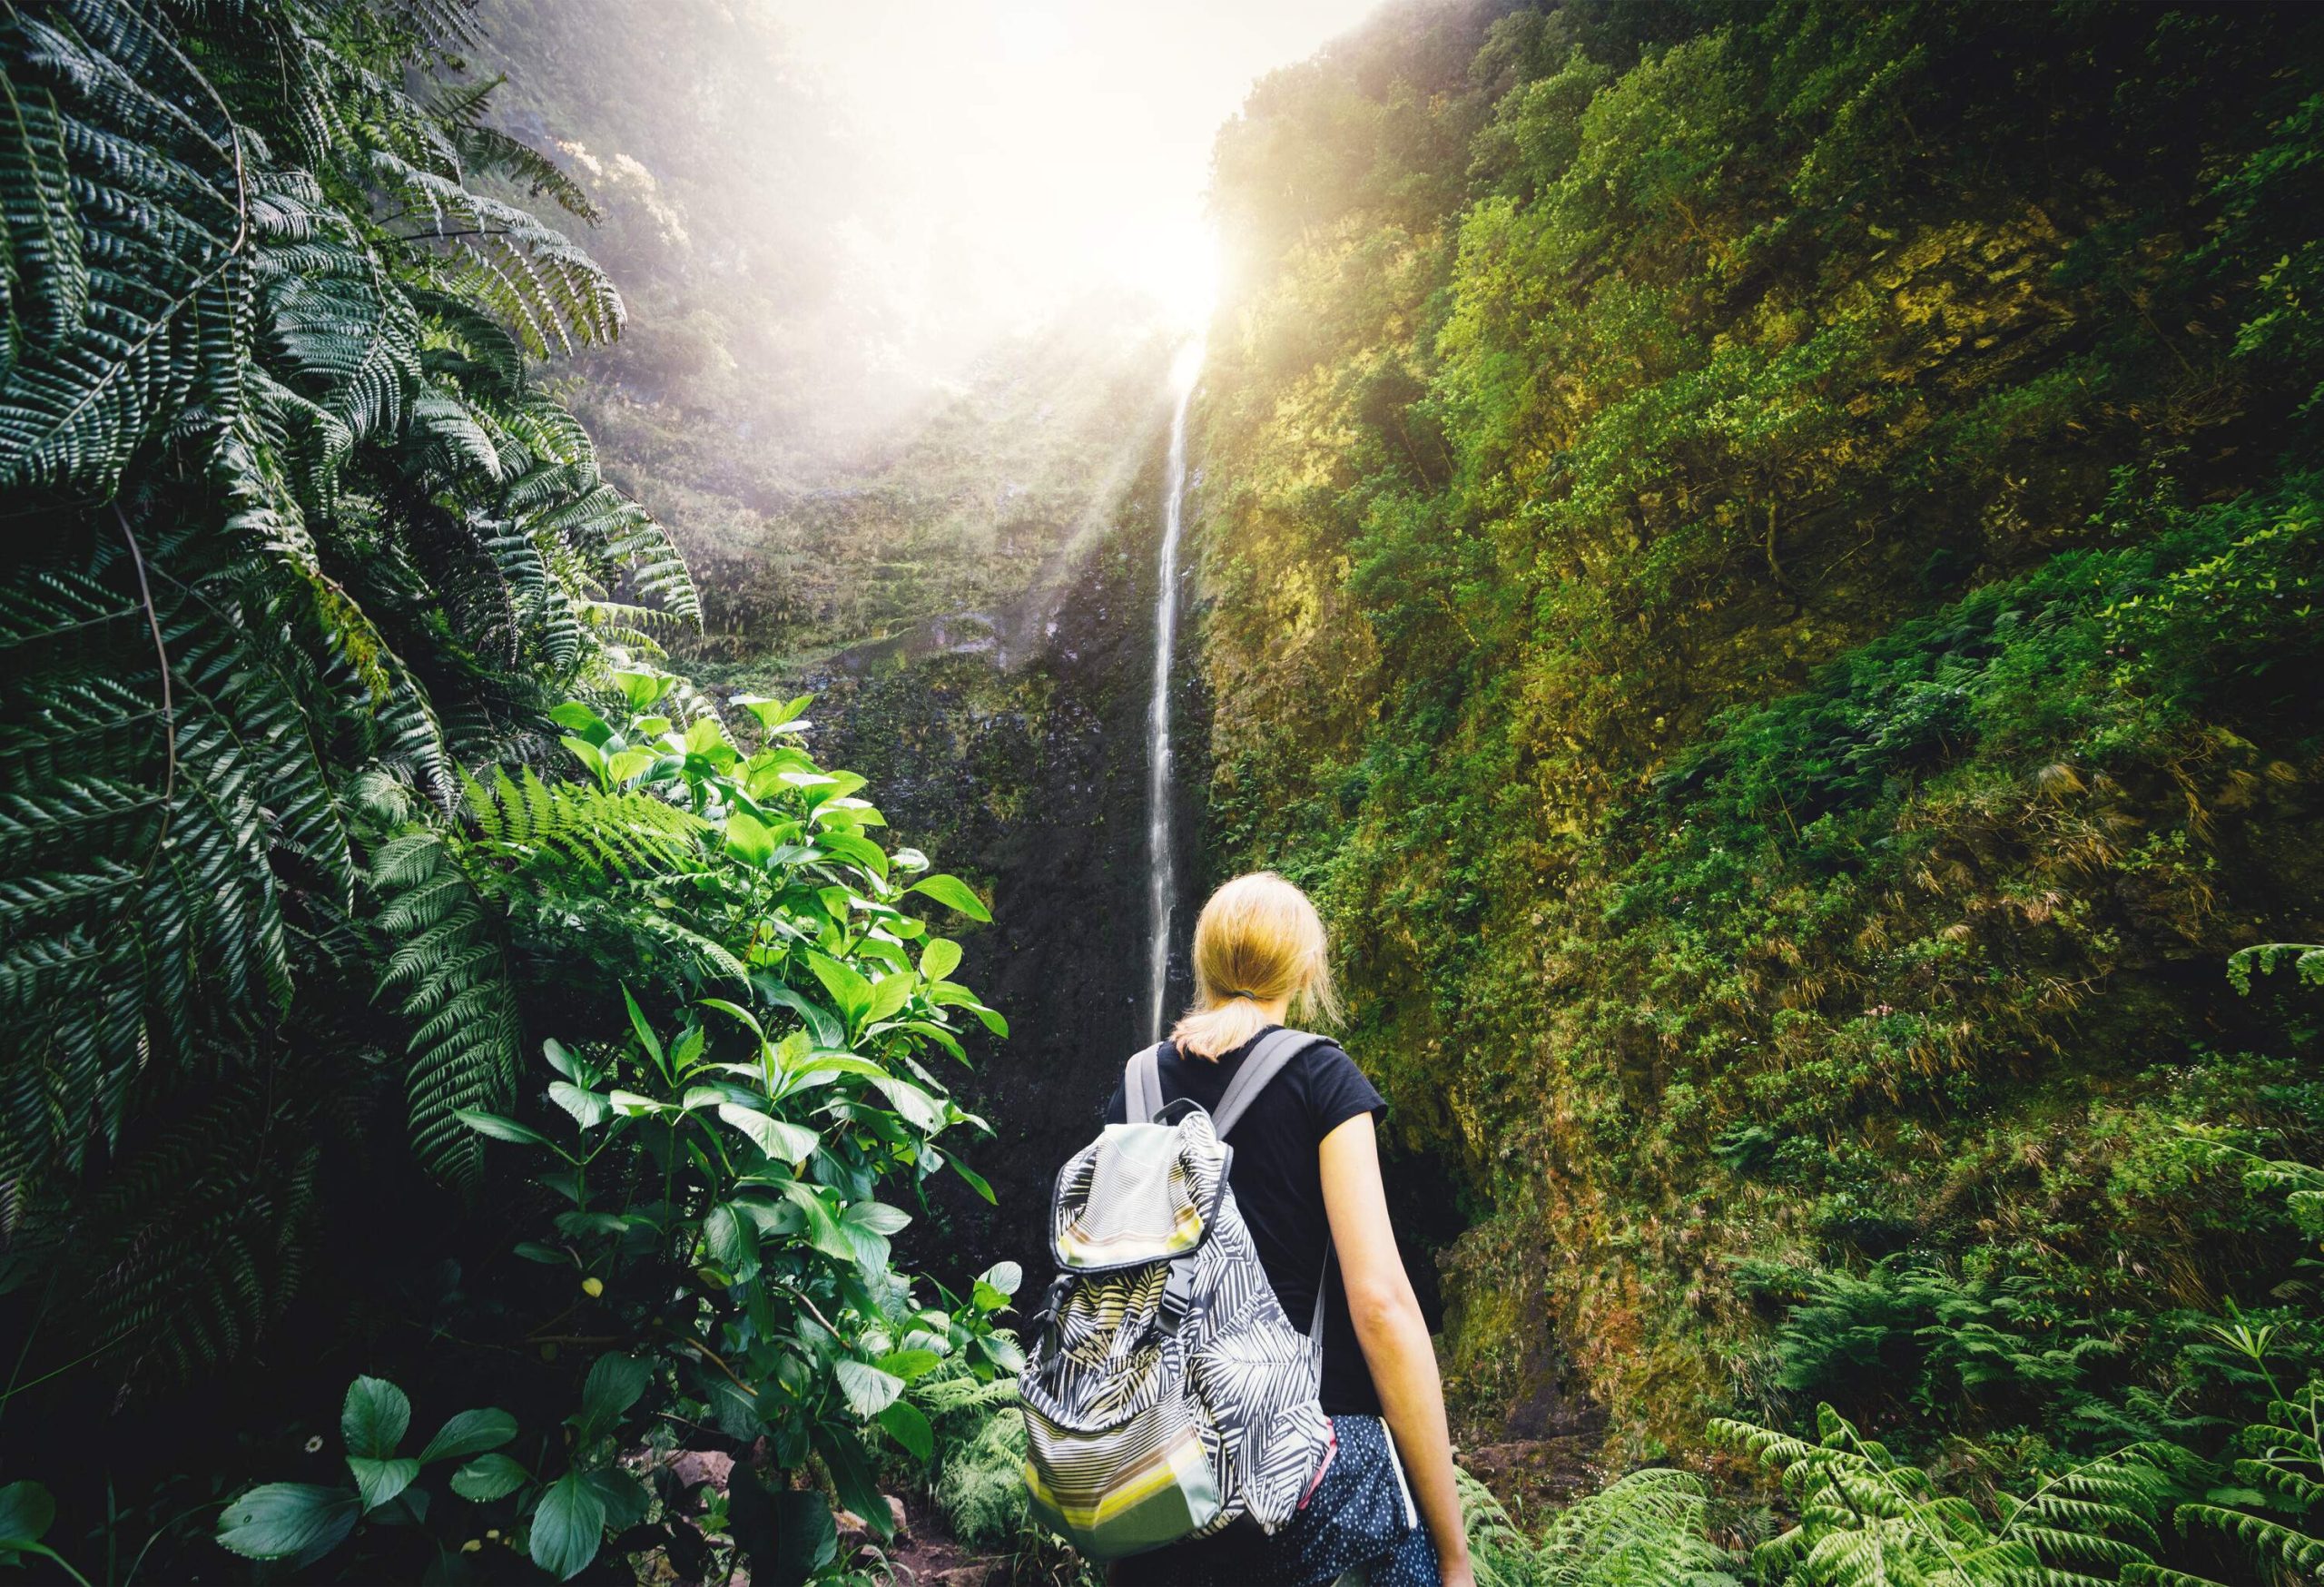 A blonde woman with a backpack gazing up at a tall, sunlit cascade.